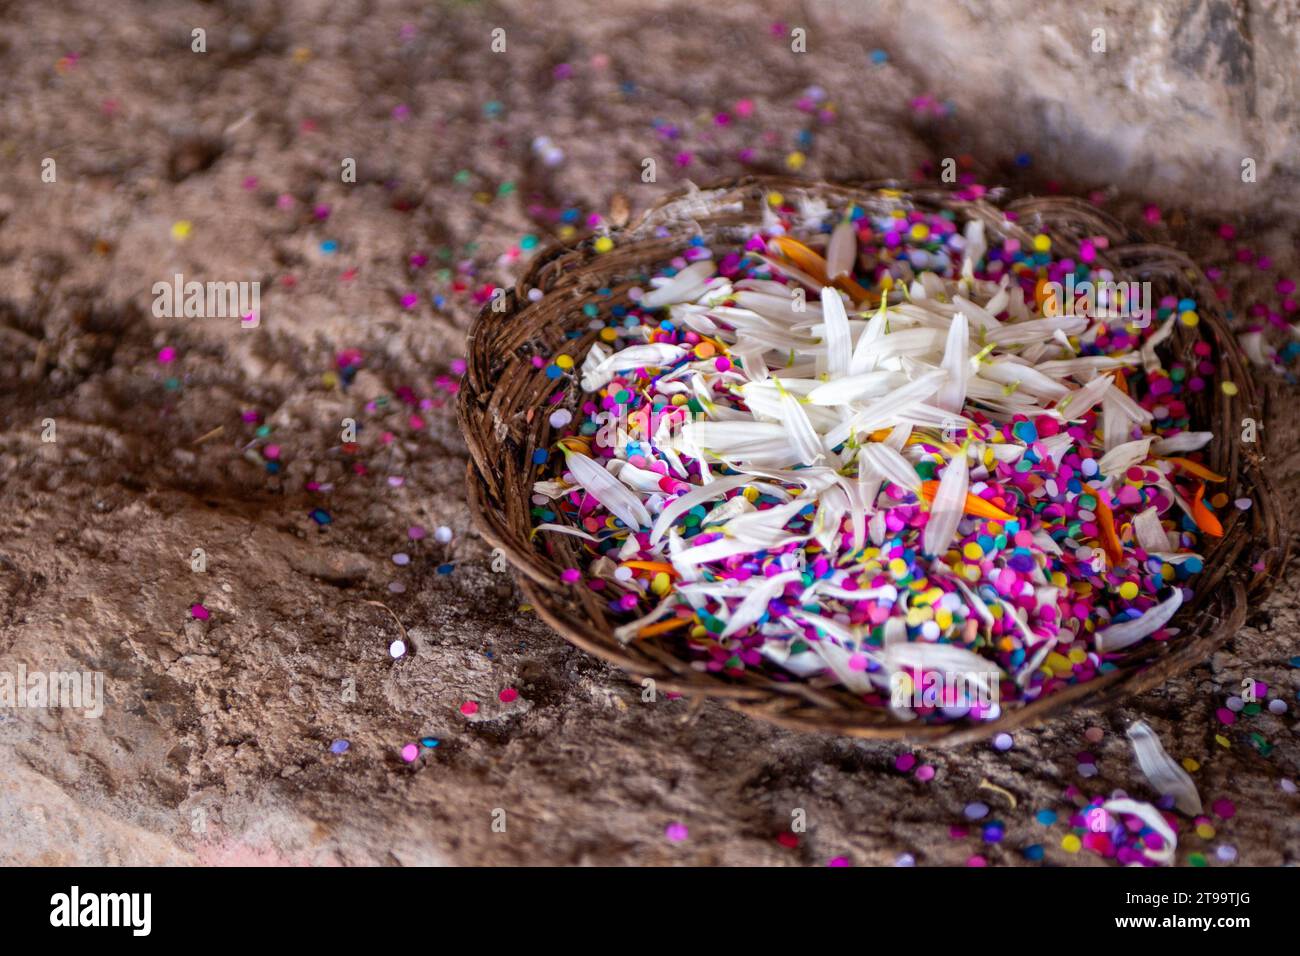 Confetti and Flower Petals in a basket Stock Photo